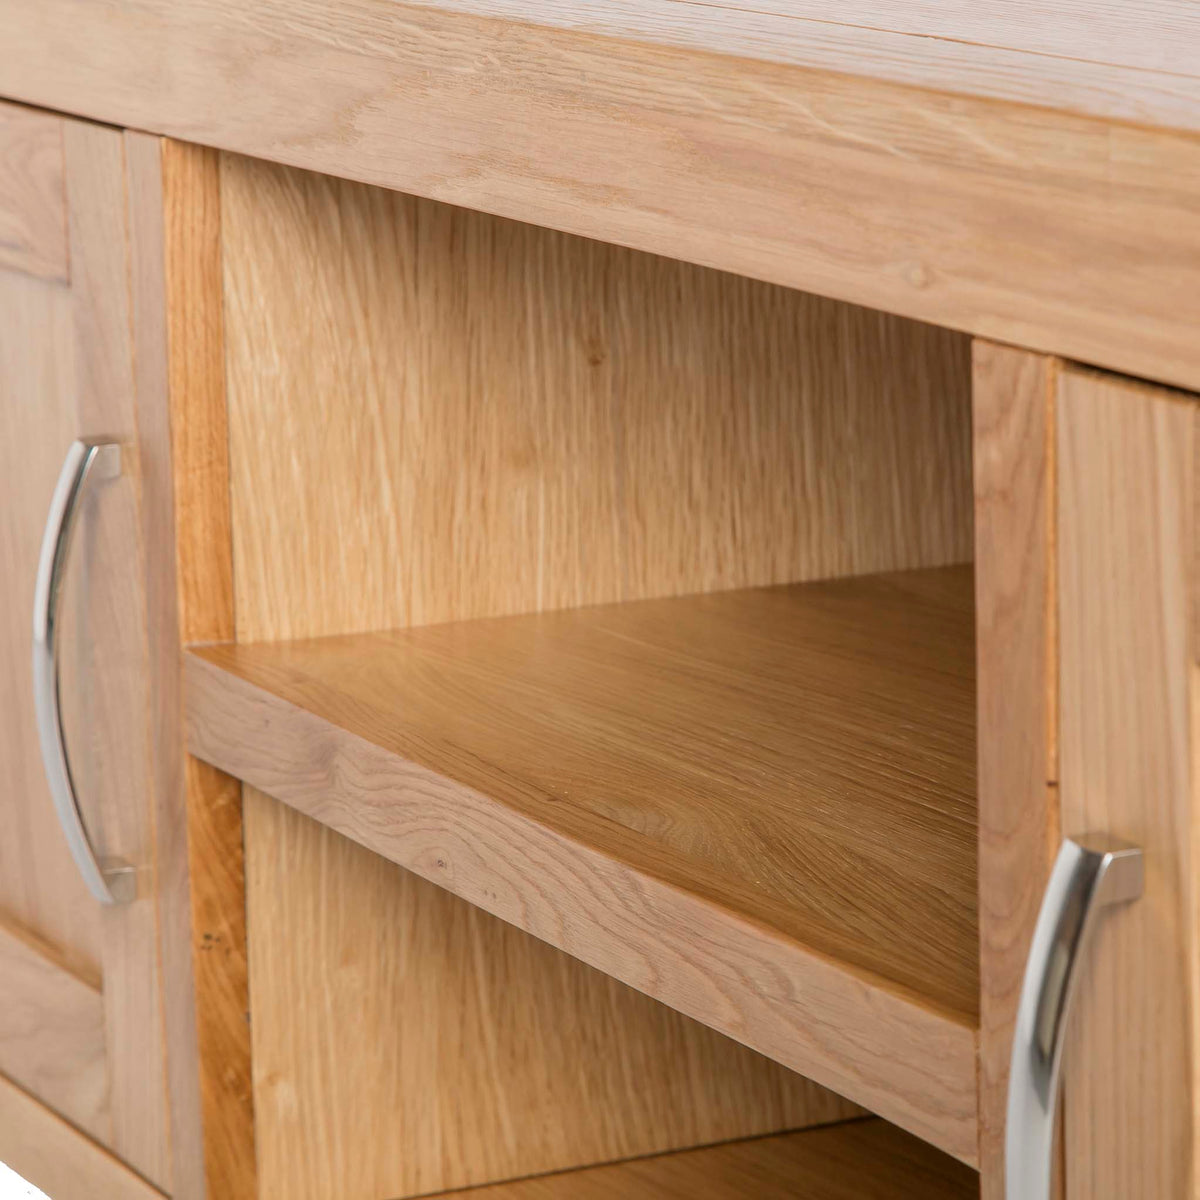 The Abbey Light Oak Large TV Stand - Close up of mid section shelves